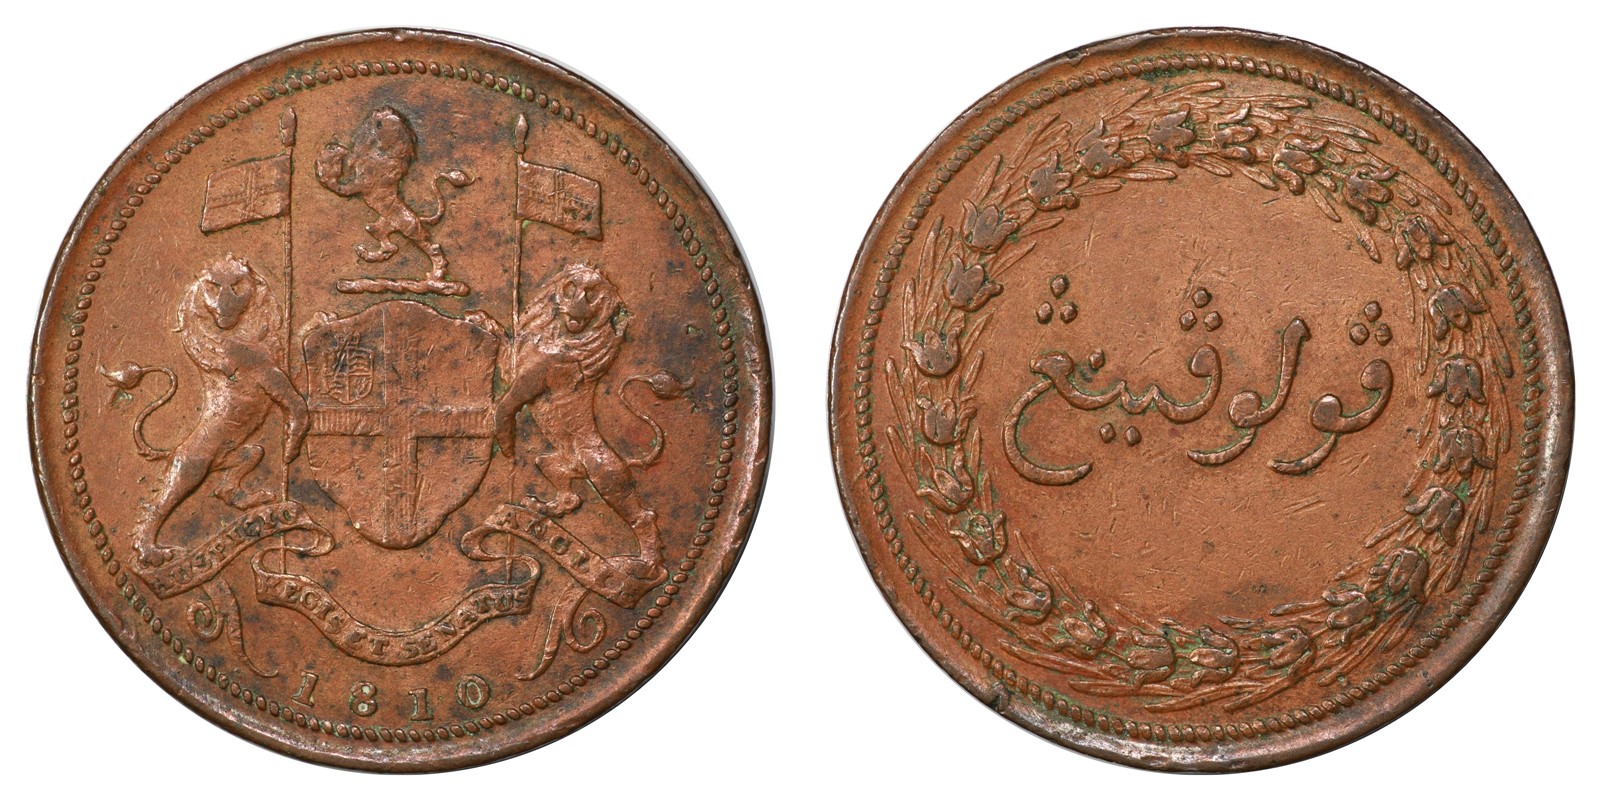 East Indies - British East India Company - Penang - 1 Cent 1810 - AU *